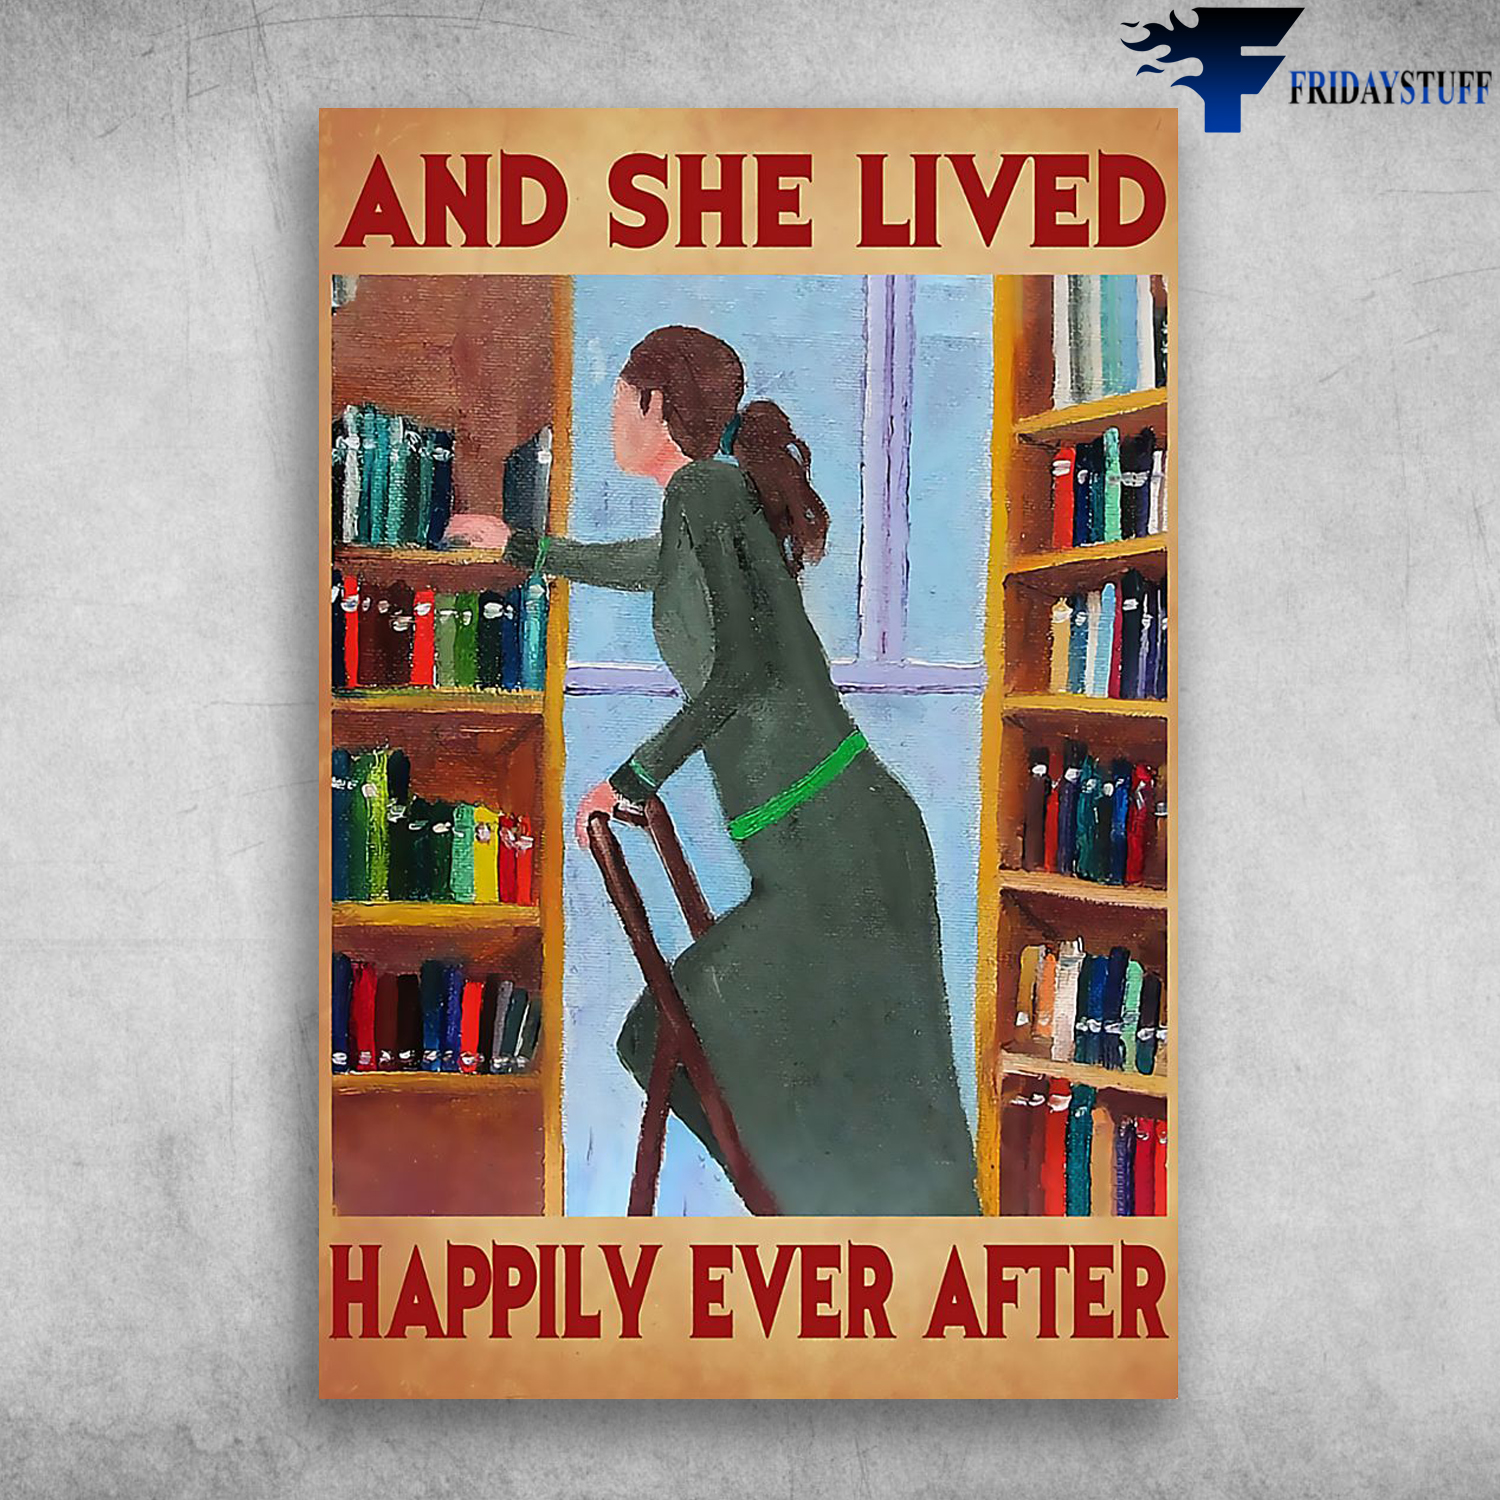 Librarian And She Lived Happily Ever After